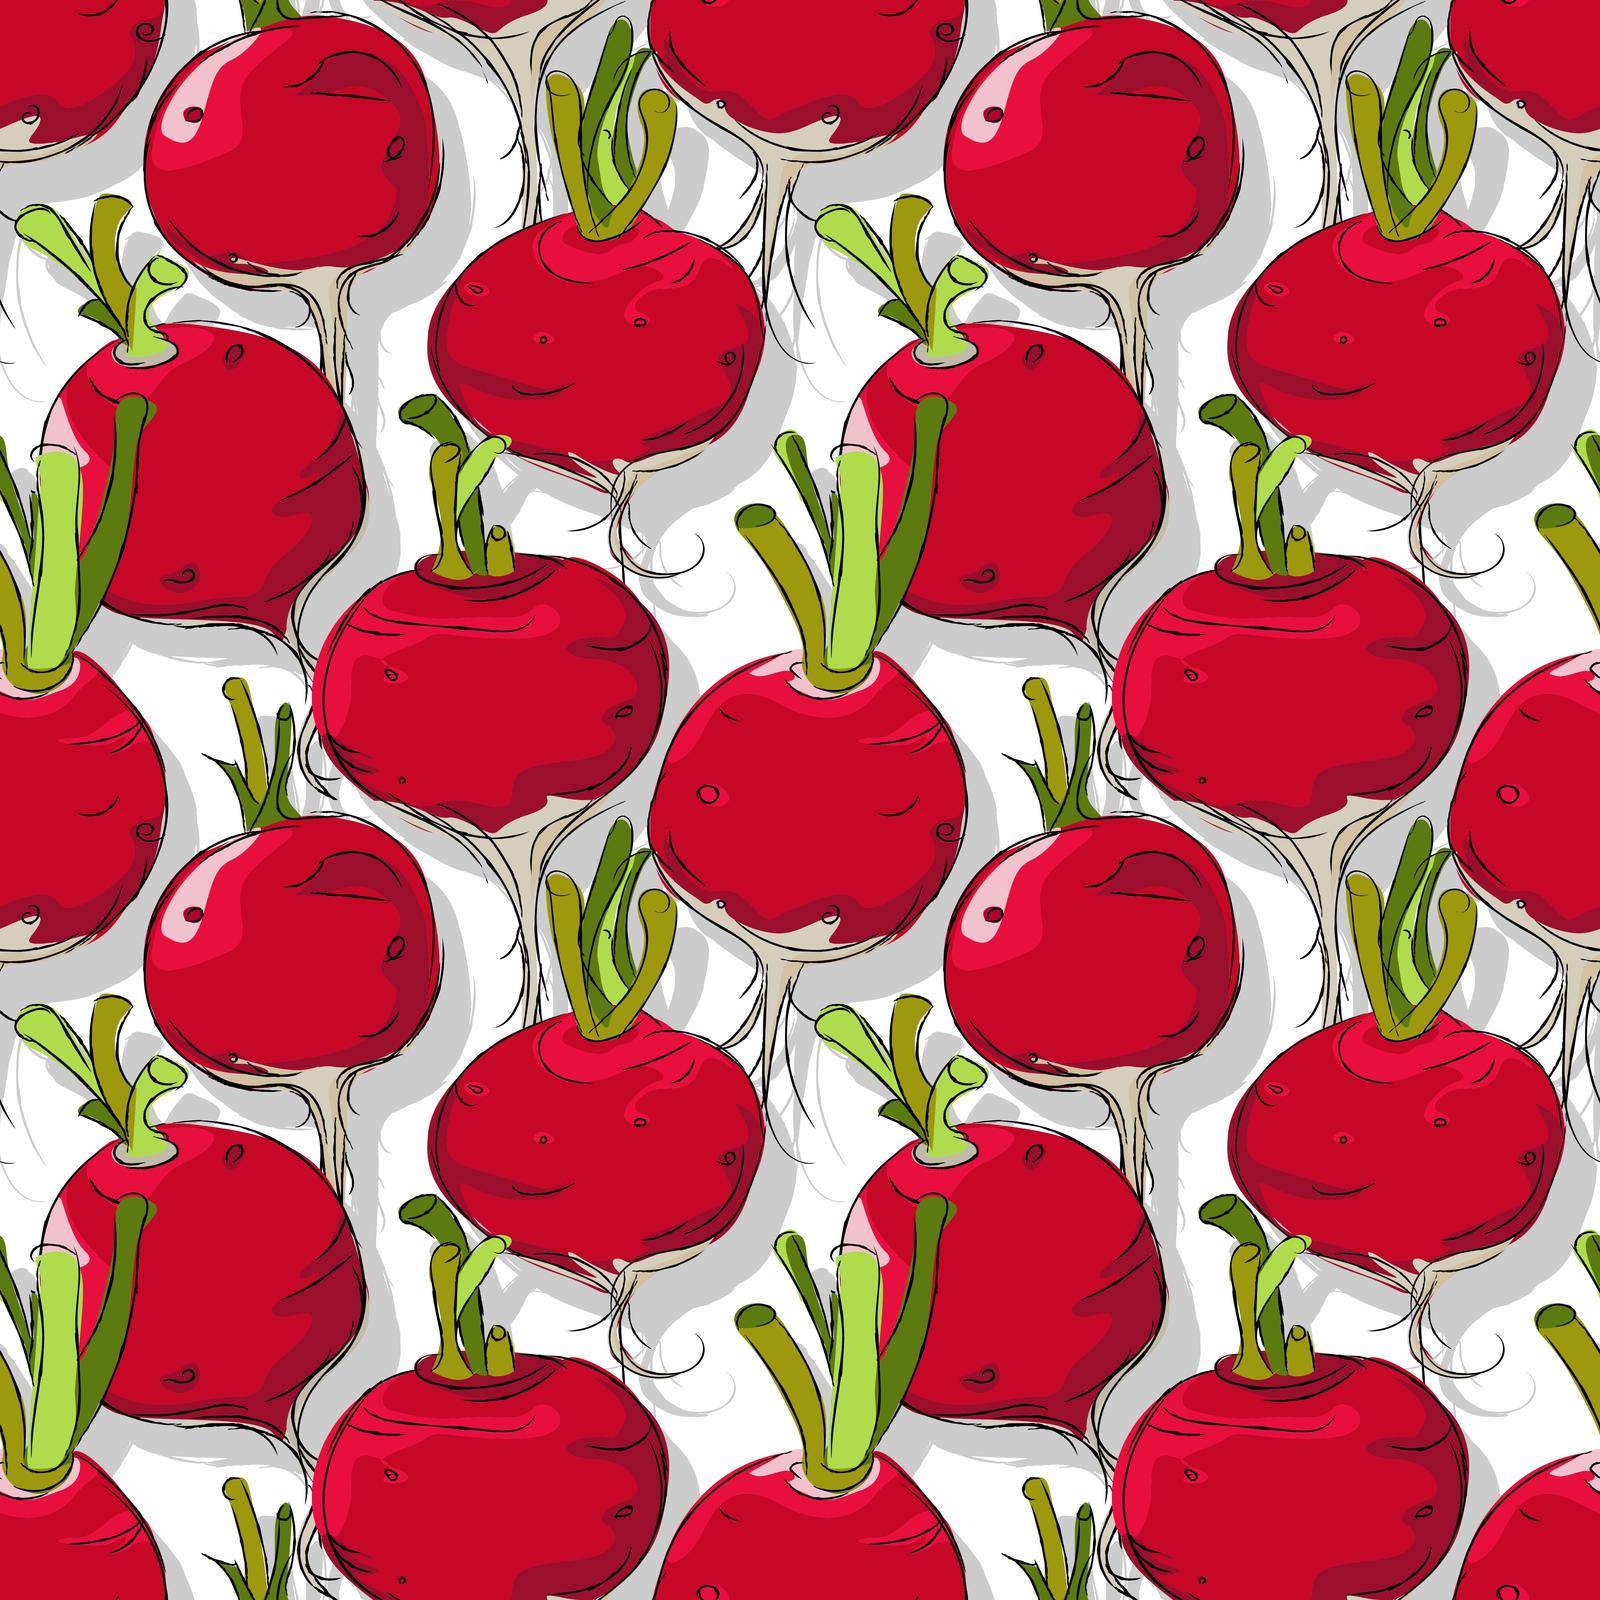 Radishes repeating pattern, editable vector template